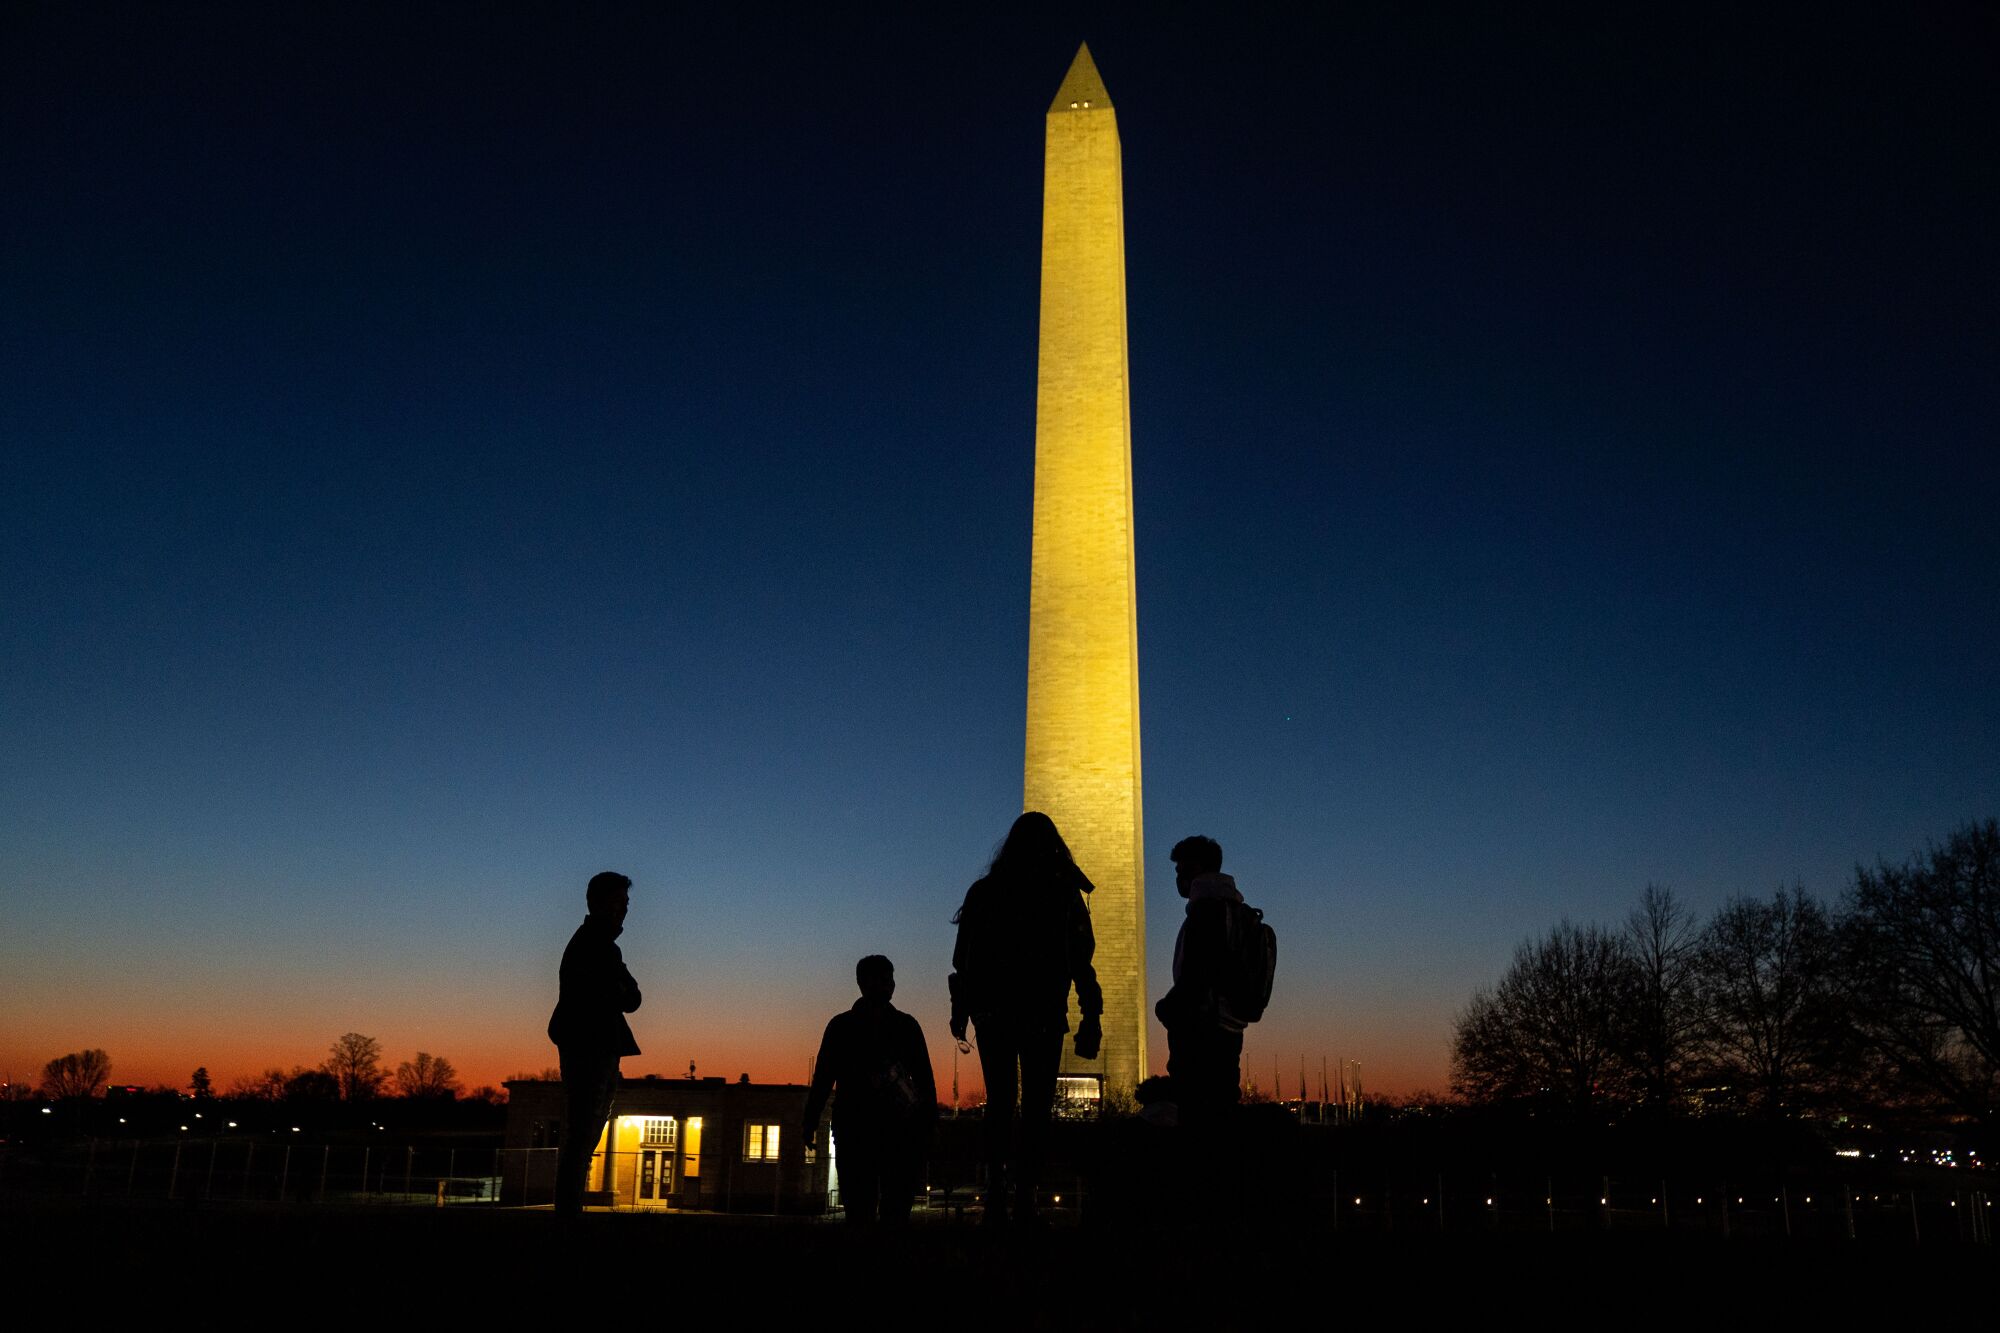 People walk on the National Mall with the Washington Monument illuminated in the evening sky.